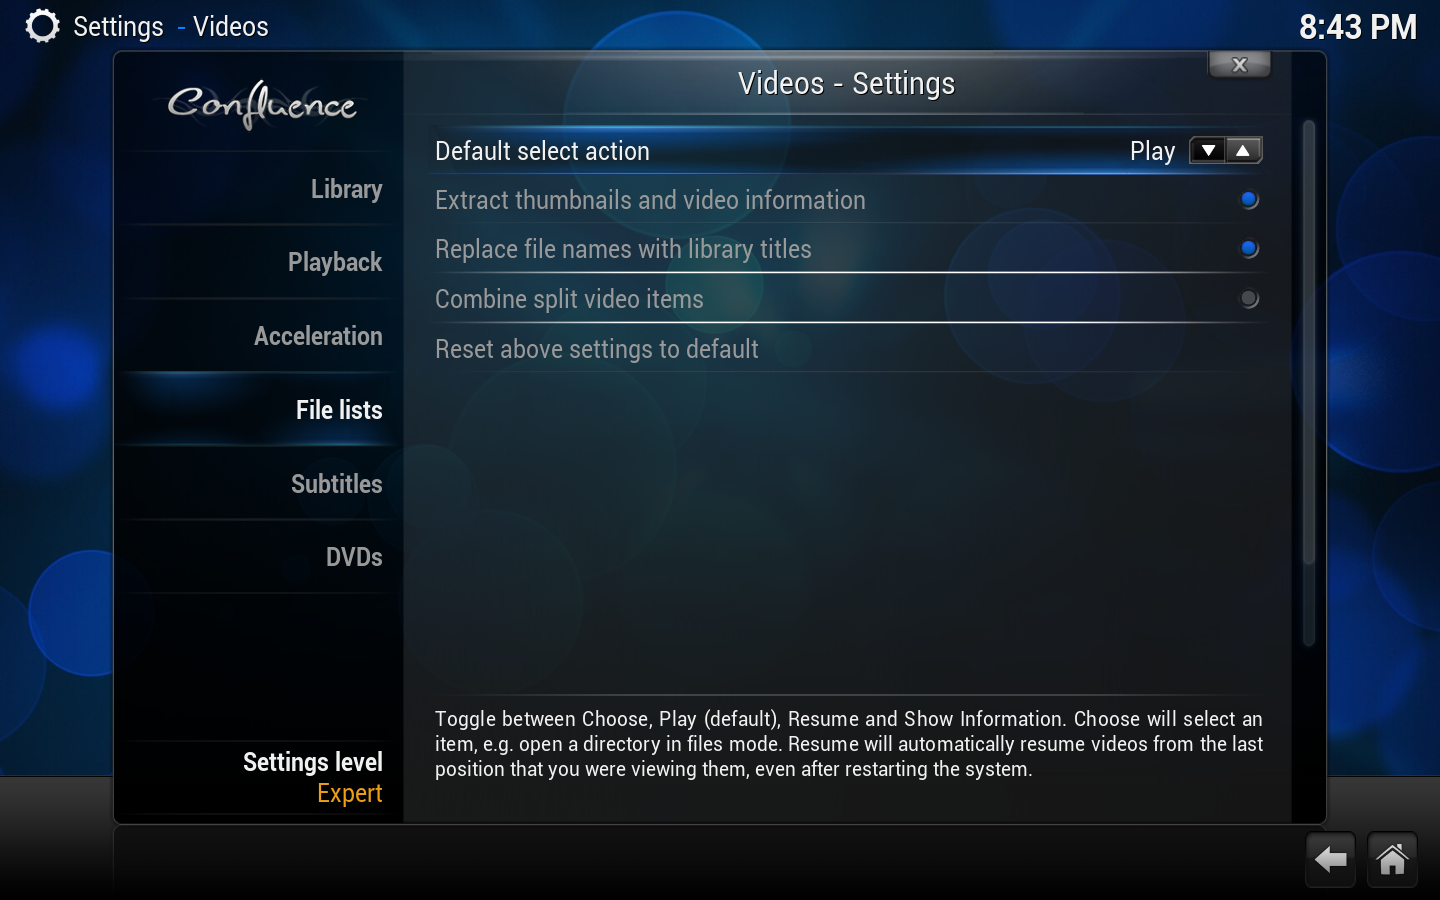 File:Settings.videos.file lists.png